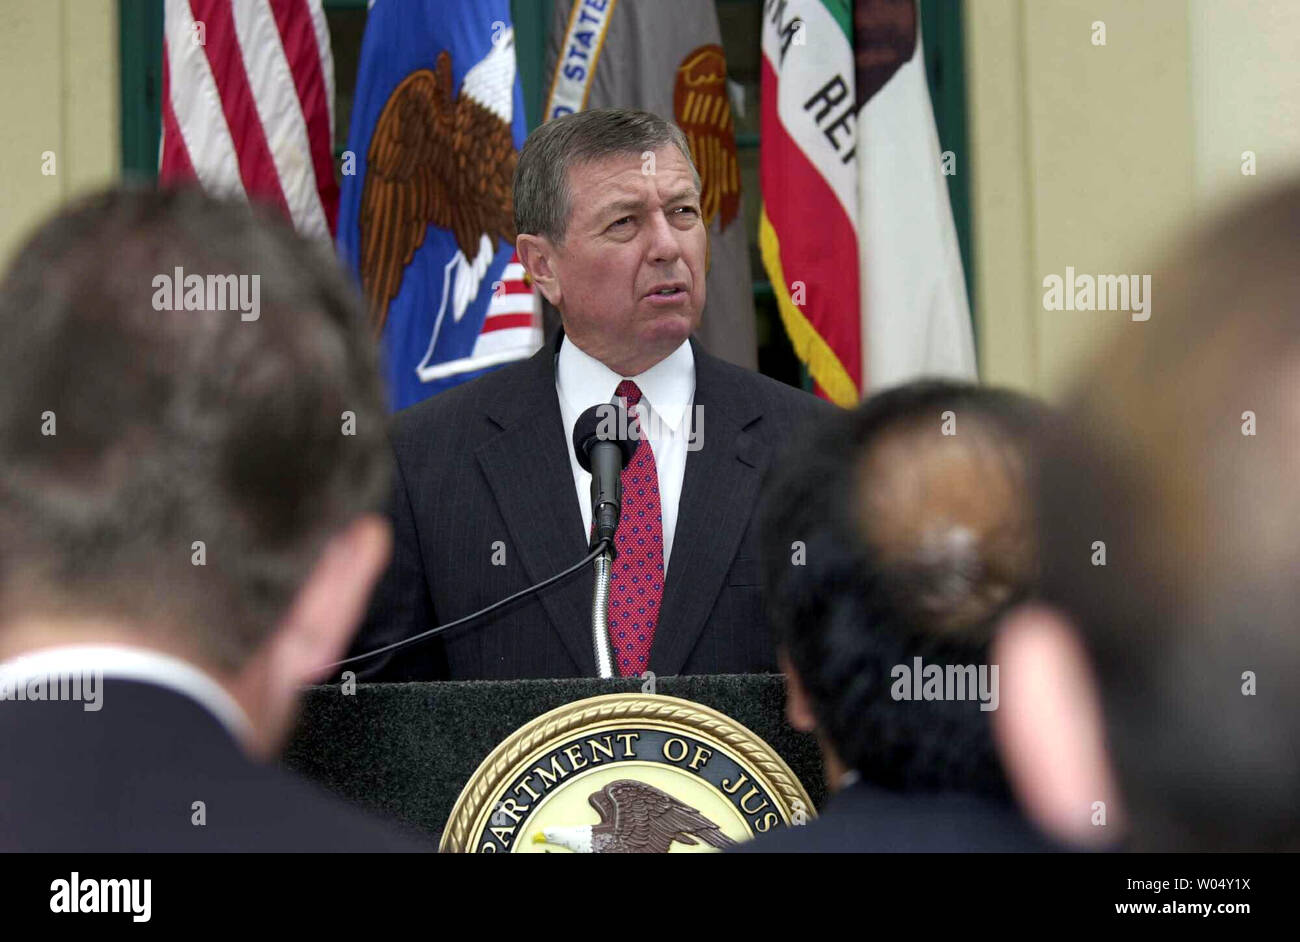 SDP2003070802- SAN DIEGO, July 8 (UPI) - US Attorney General John Ashcroft along with Rafael Macedo De la Concha, the Attorney General of Mexico announced July 8 2003 at a news conference in San Diego, California, the indictment of 12 individuals who represent the hierarchy of the Arellano-Felix drug cartel. The Arellano-Felix organization is the most notorious multi-national drug trafficking organization ever and is responsible for multiple murders and the transportation of cocaine and marijuana from Tijuana, Mexico to the US through the San Diego and Mexicali borders.     ec/EARL S. CRYER Stock Photo